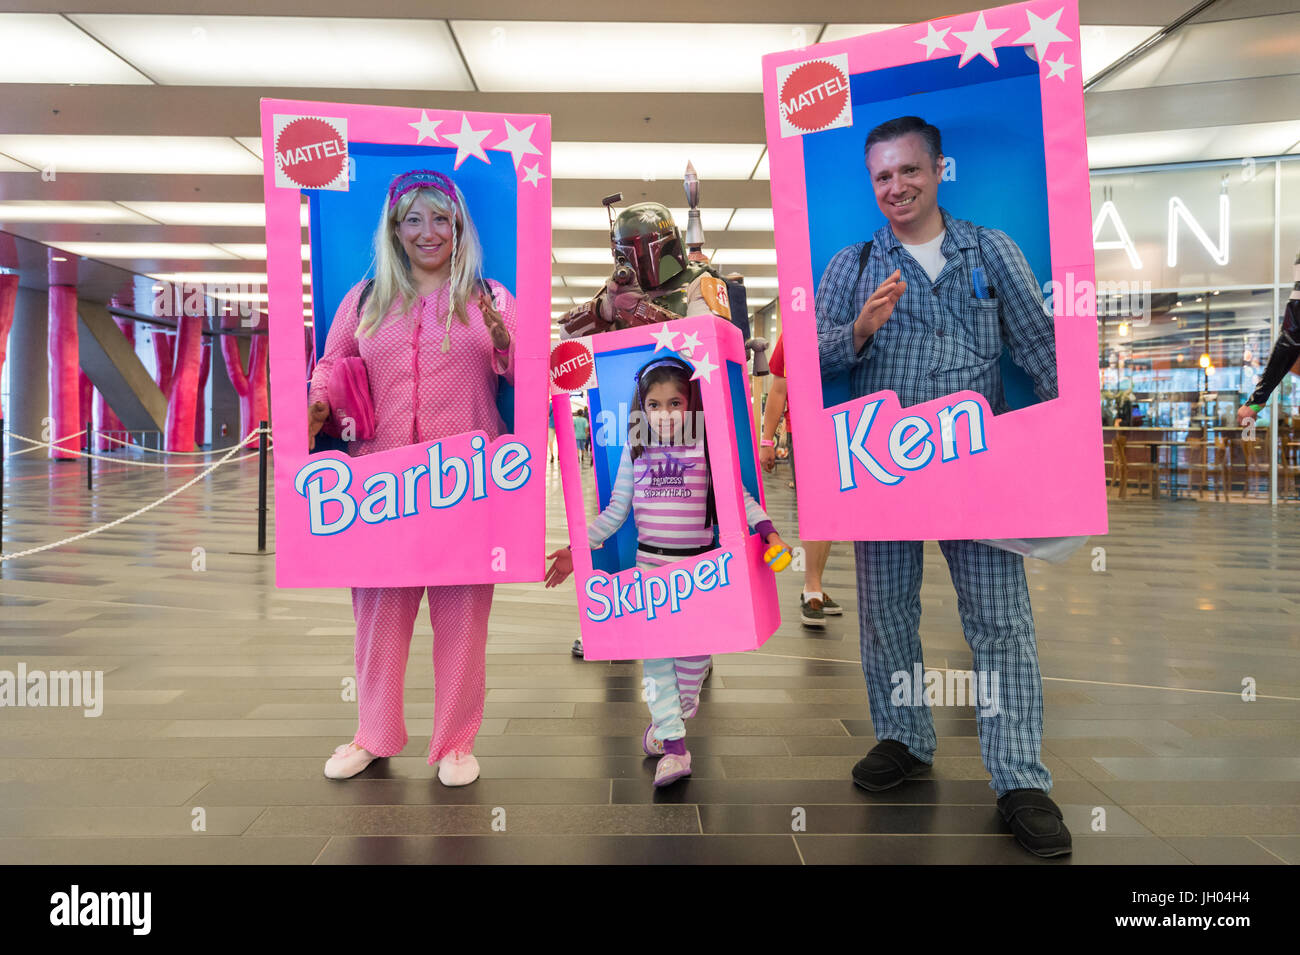 Barbie Box High Resolution Stock Photography and Images - Alamy